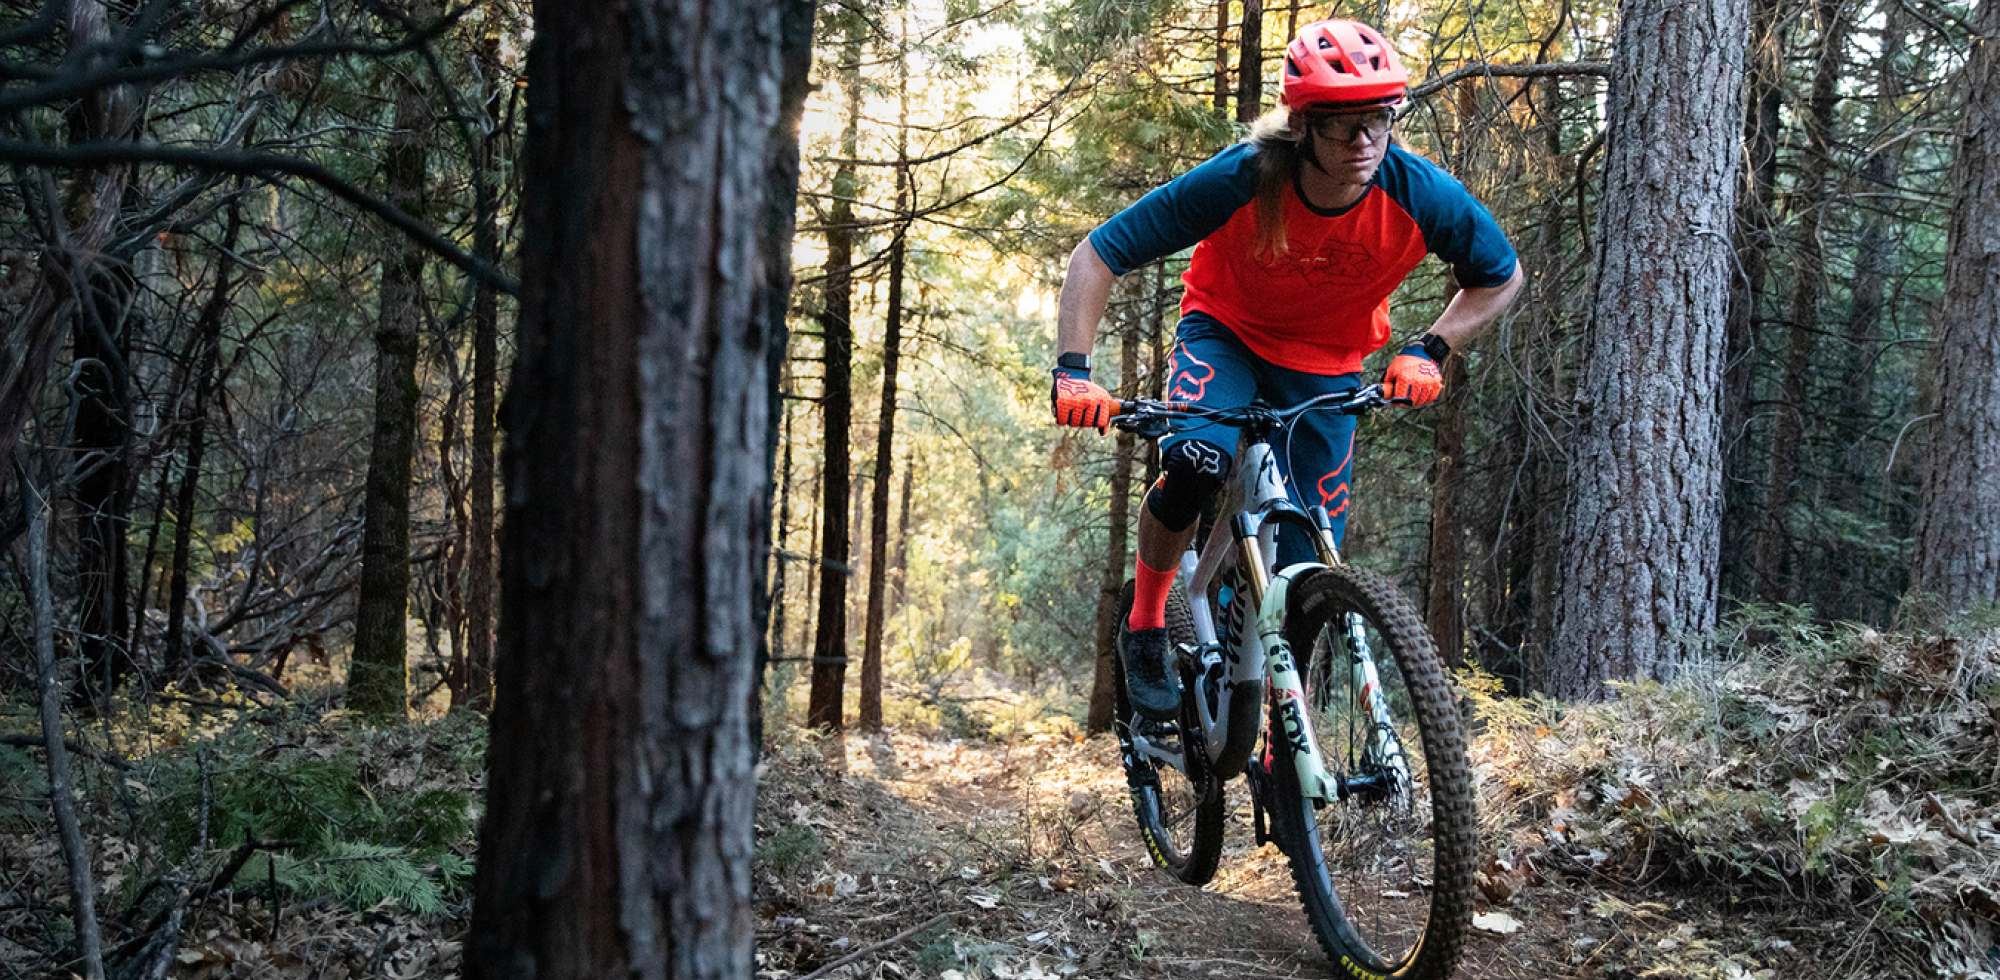 Mountainbiker riding through forest with FOX clothing